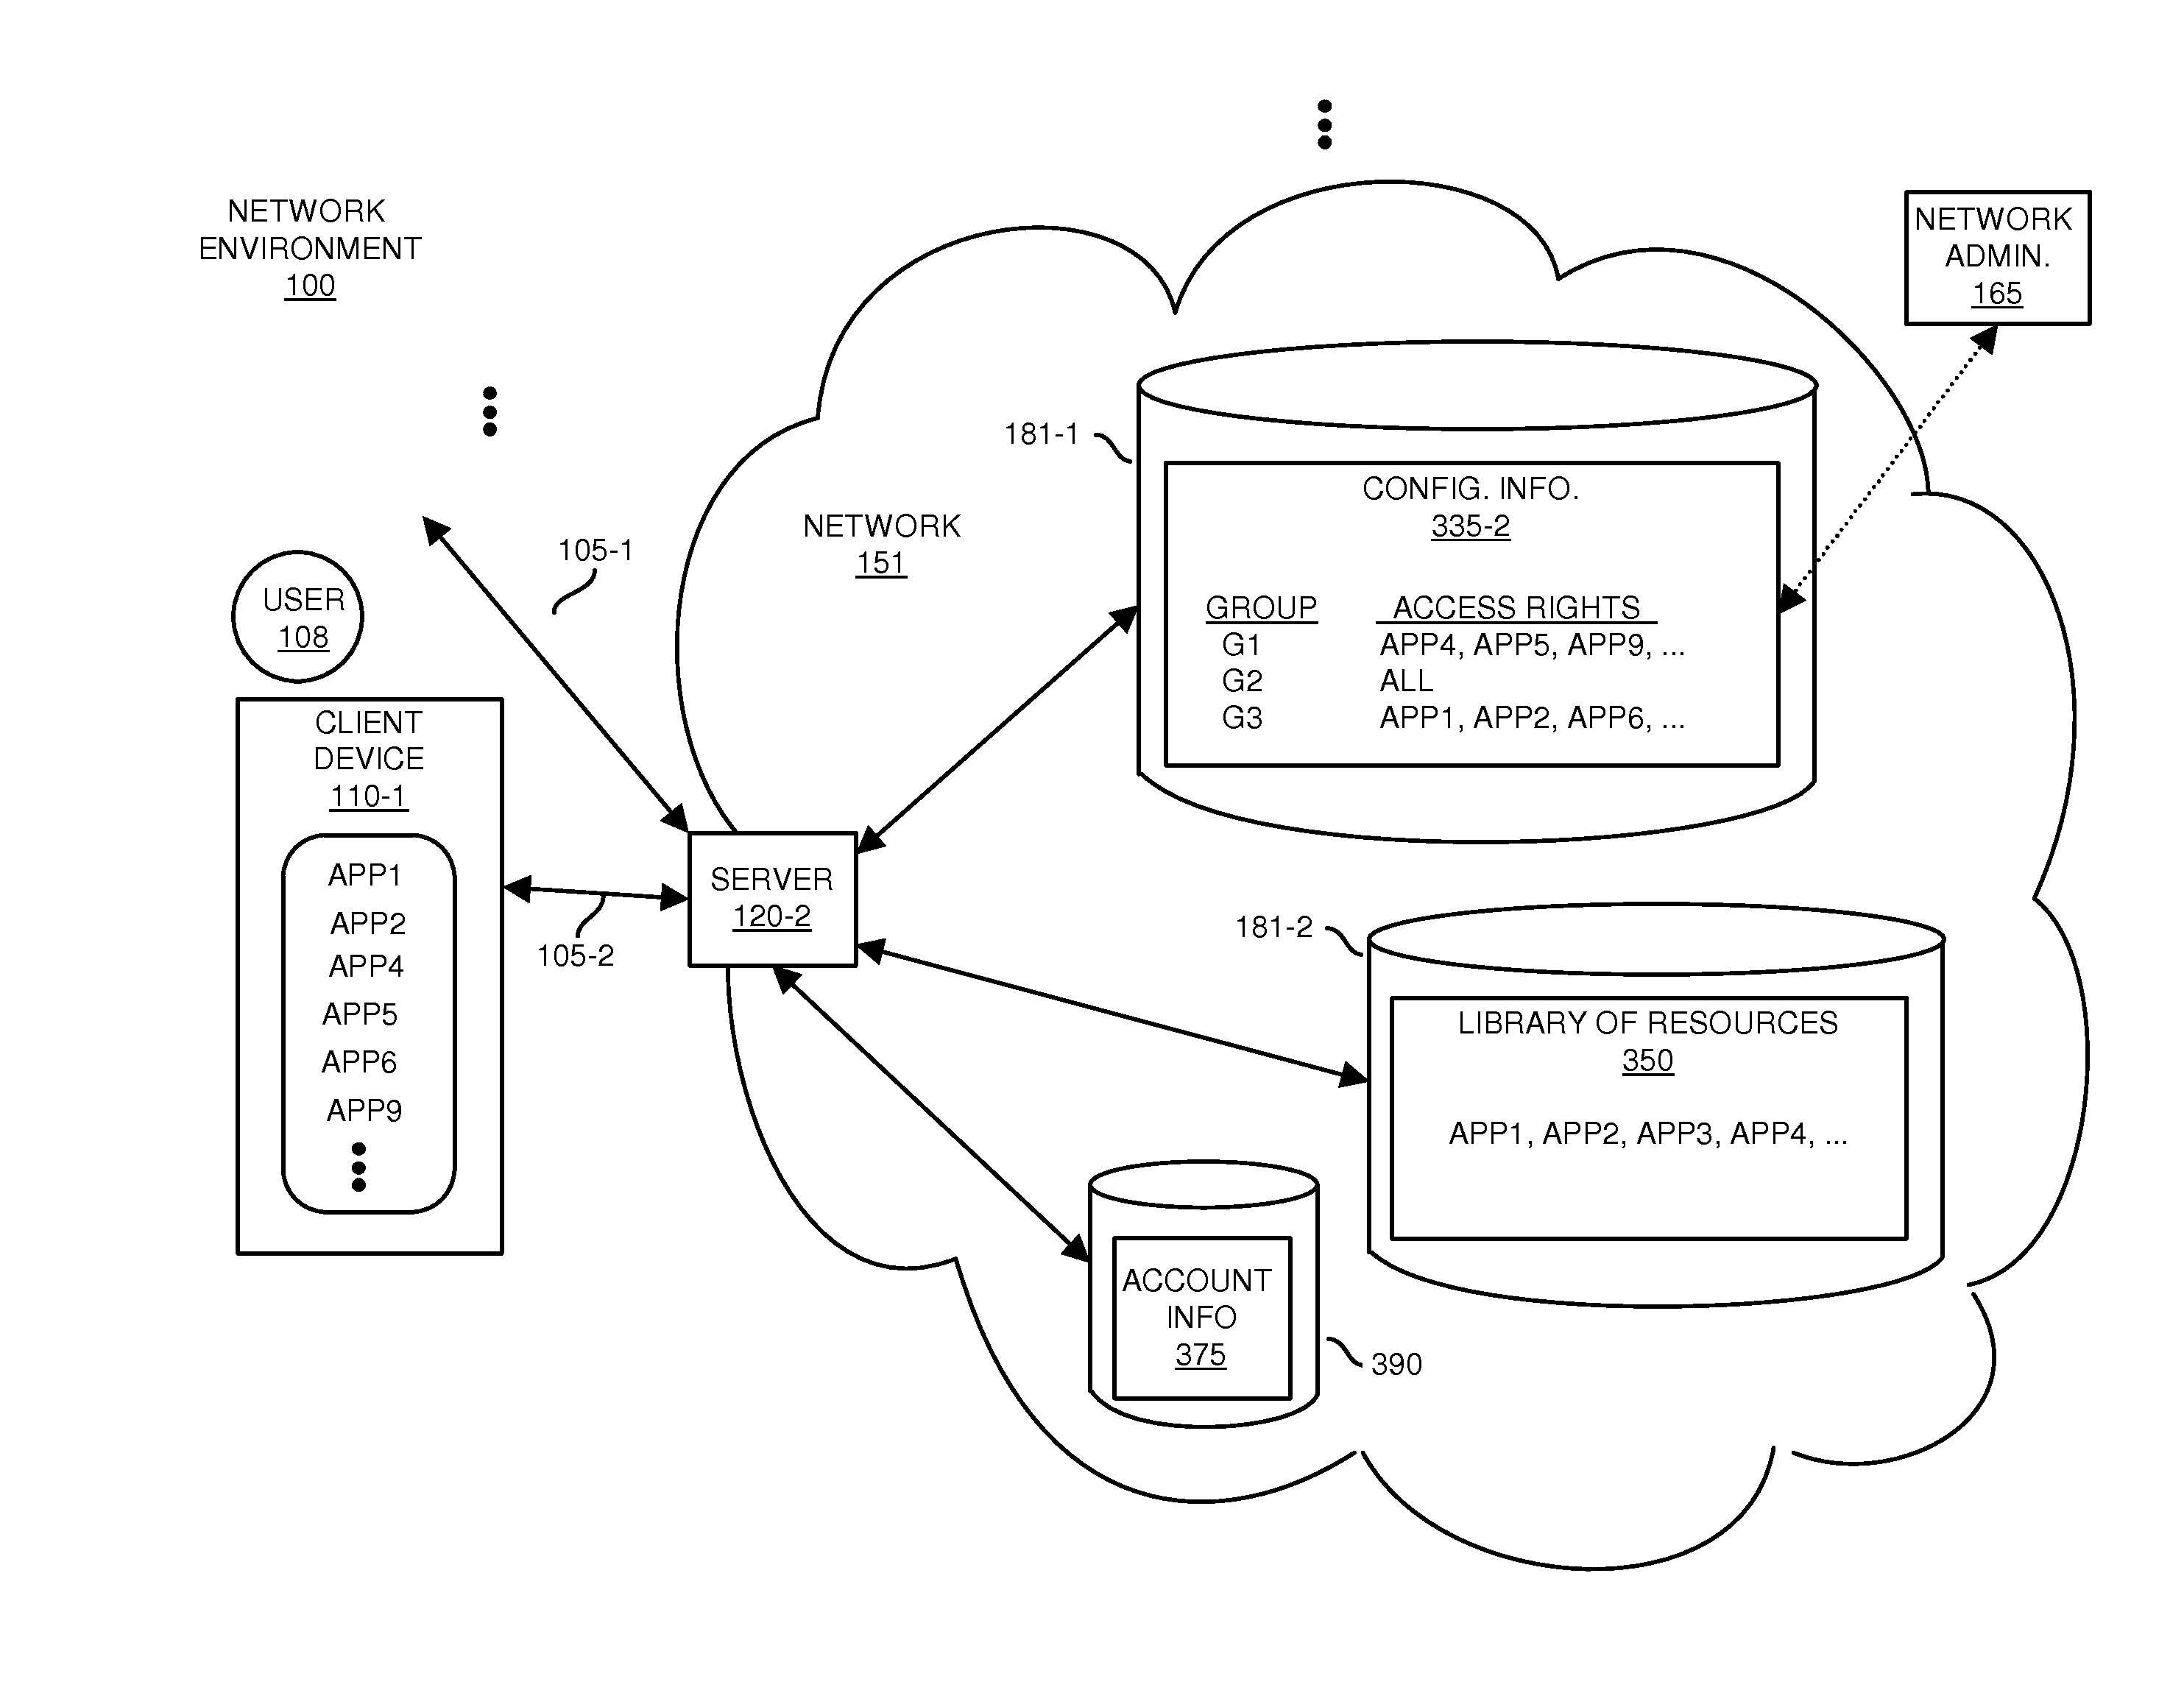 Conveyance of configuration information in a network